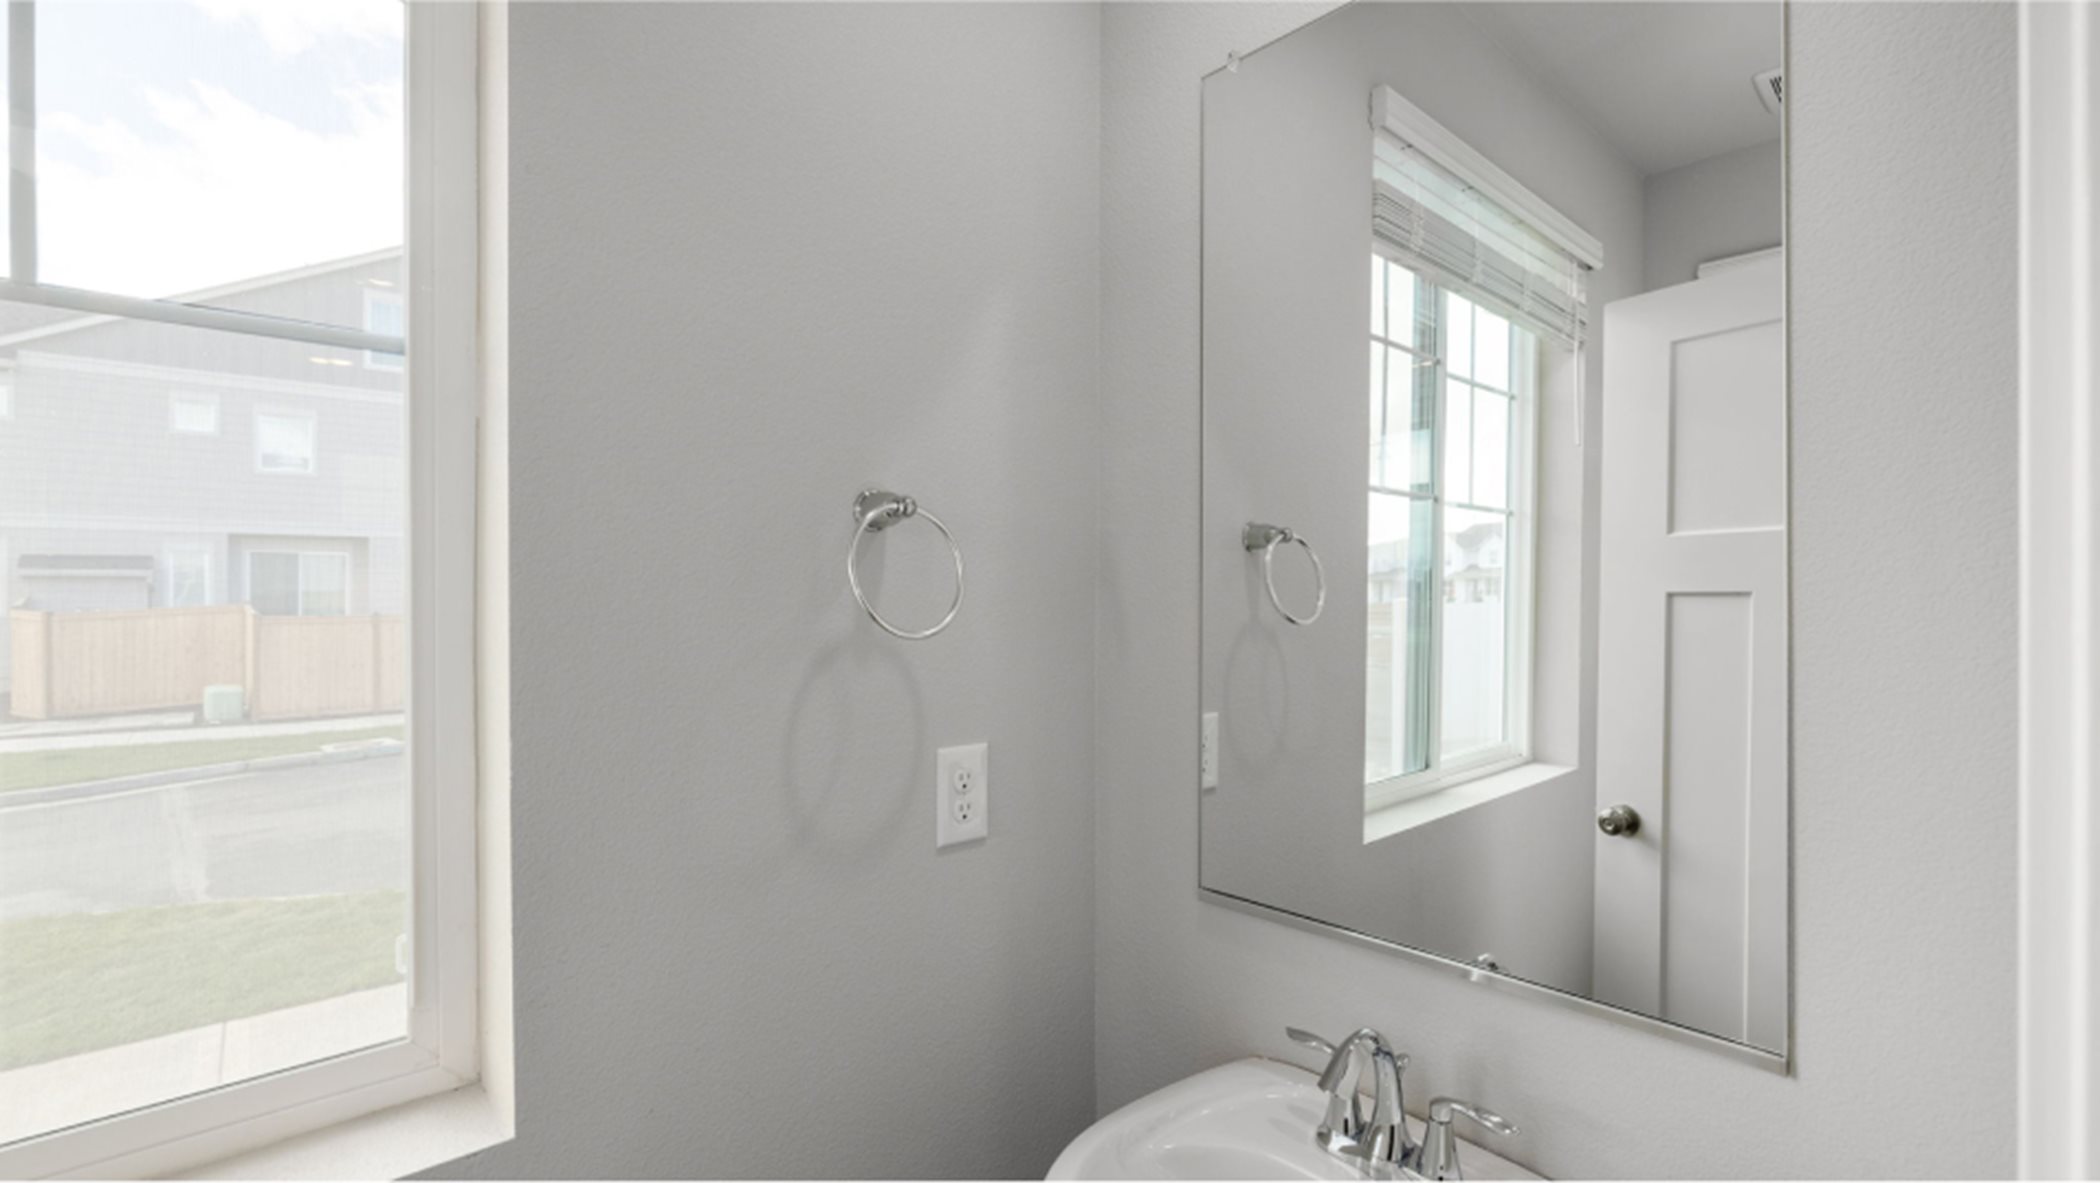 Powder room with large window